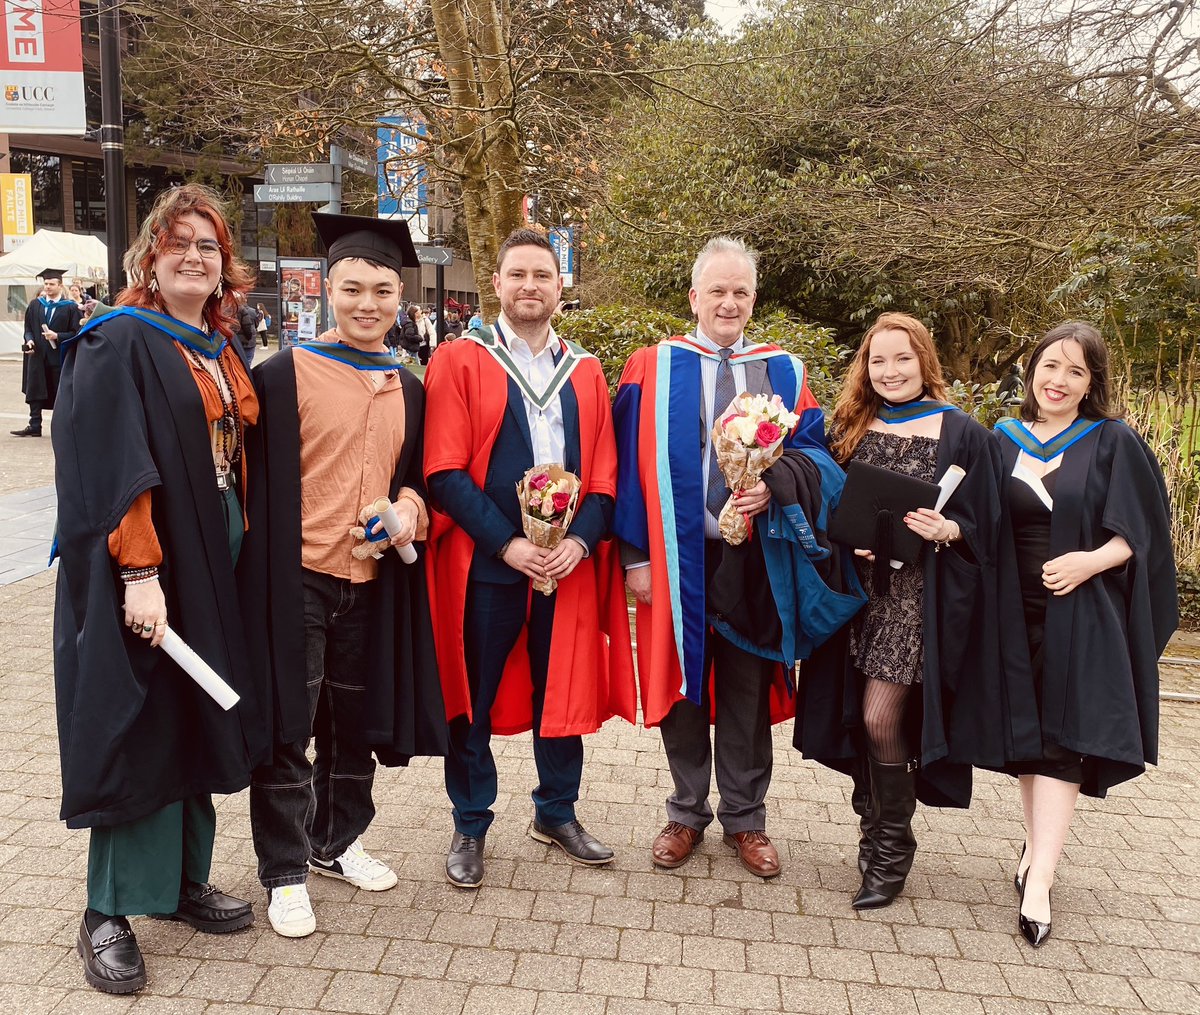 Congratulations to our new MA In Ethnomusicology graduates 👏

@MusicUCC